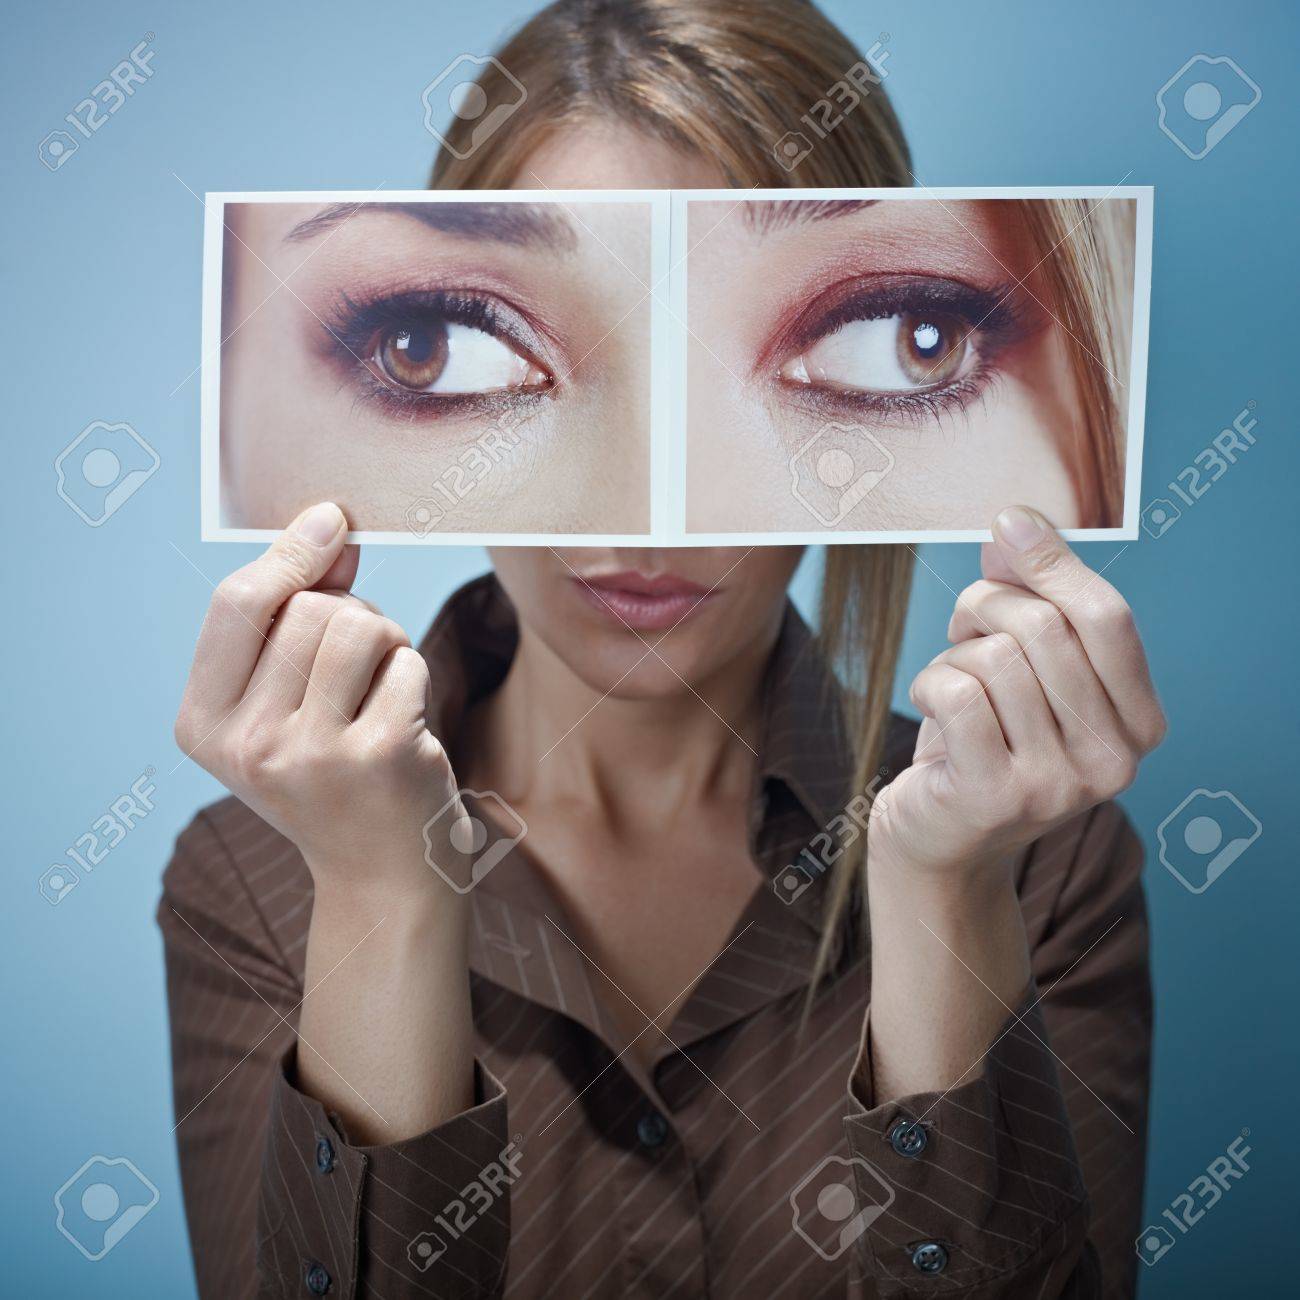 8269945-mid-adult-business-woman-holding-photo-of-her-eyes-looking-at-different-sides-on-blue-background-squ.jpg